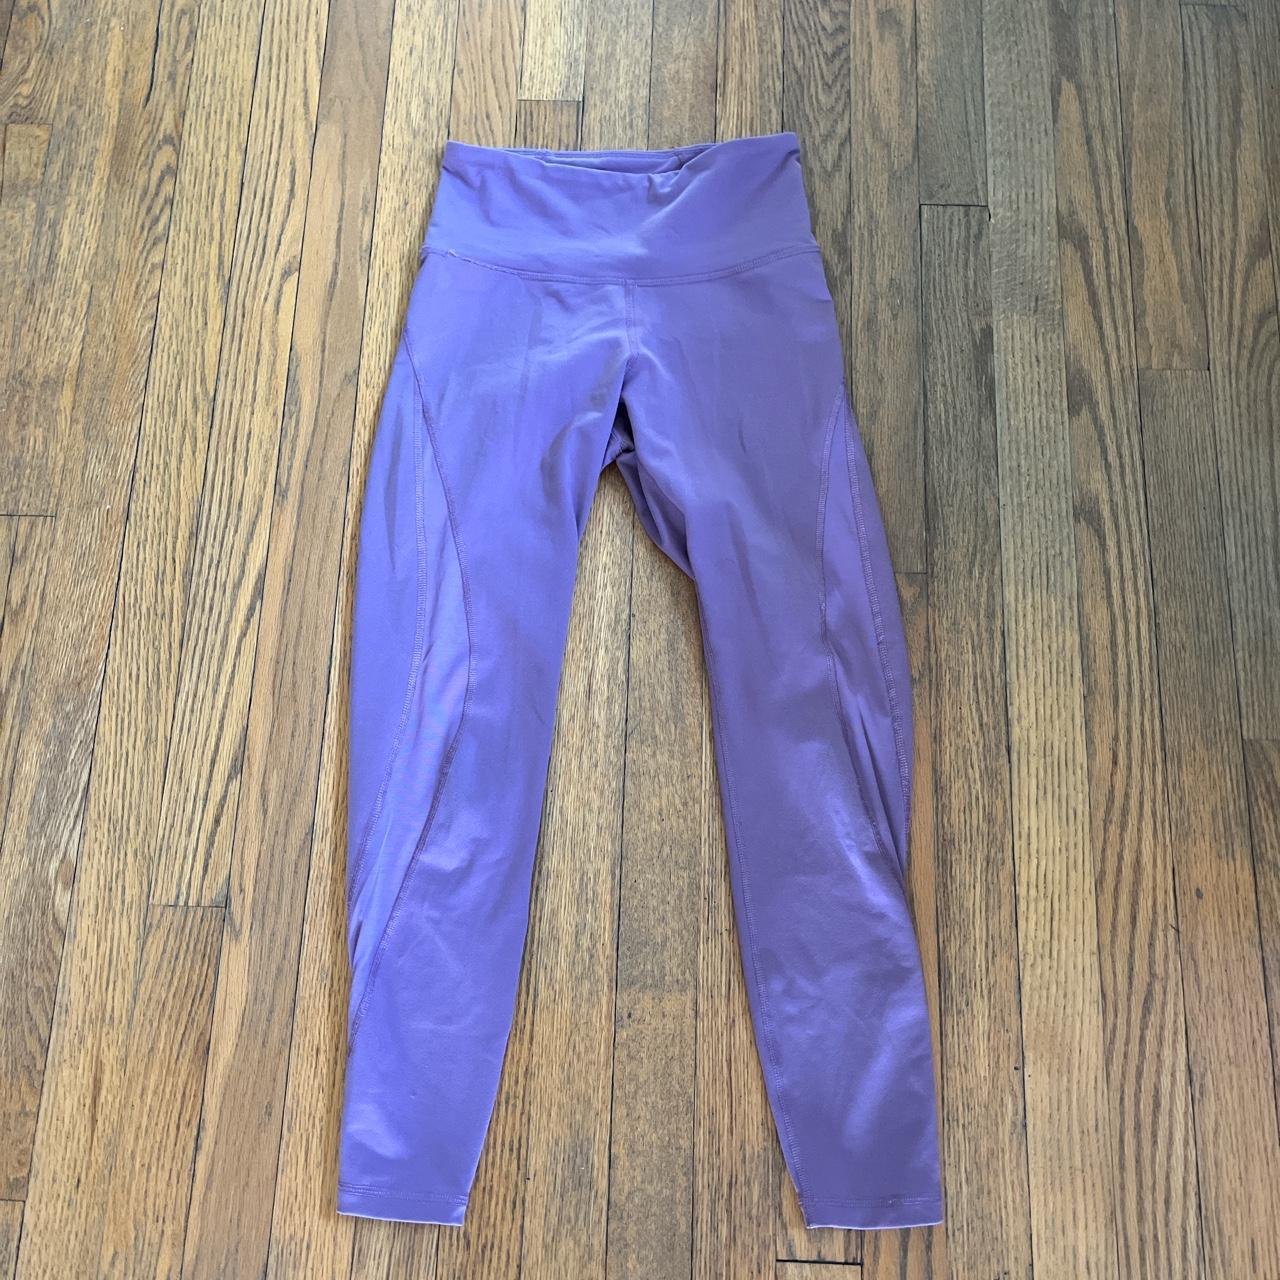 New Old Navy Joggers Sweat pants Women's Small Navy Purple New